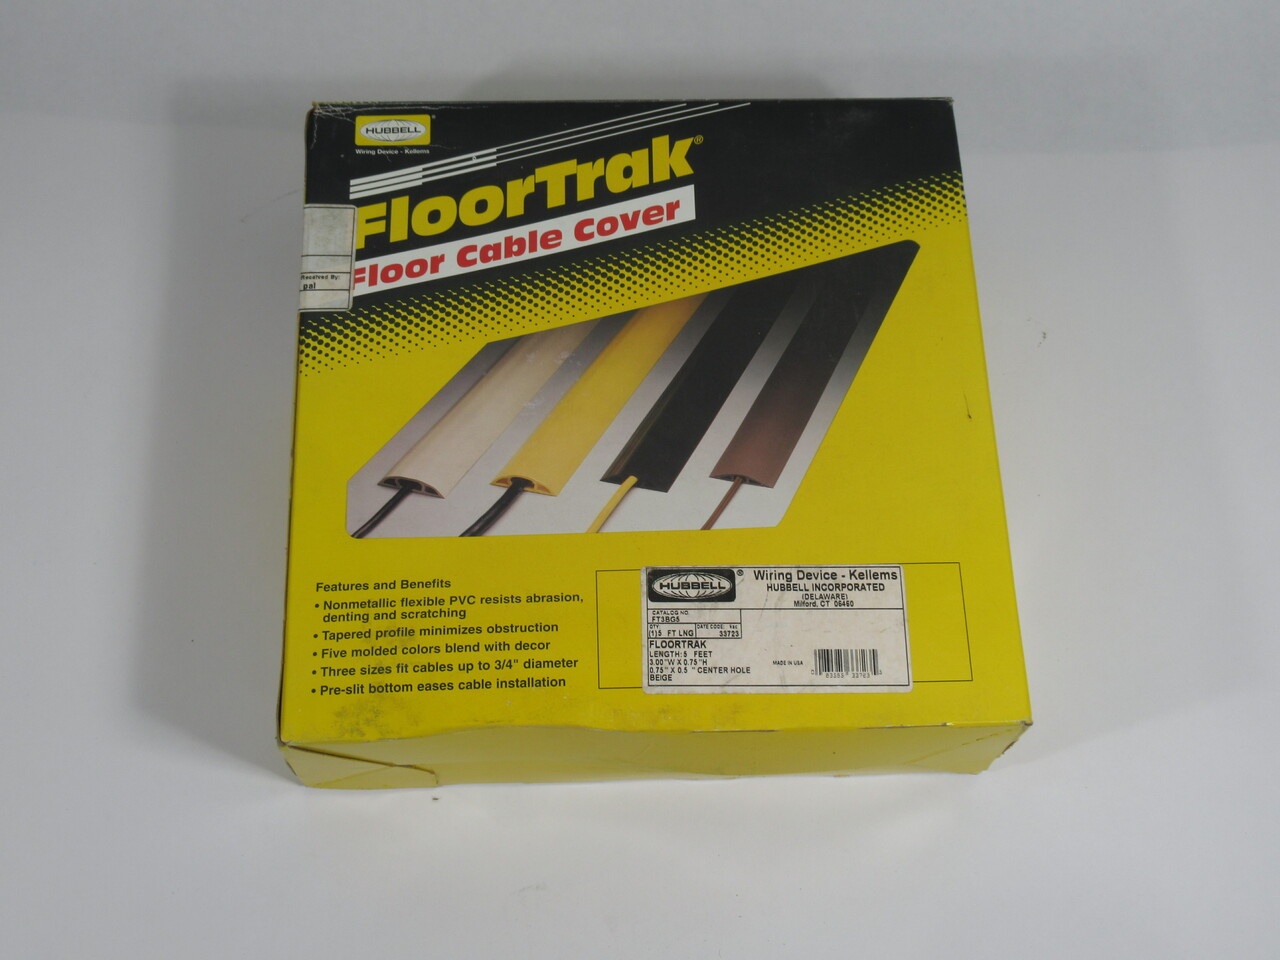 Hubbell FT3BG5 FloorTrak Flex Cable Cover Beige CUT 3' L x 3" W x 0.75" H USED